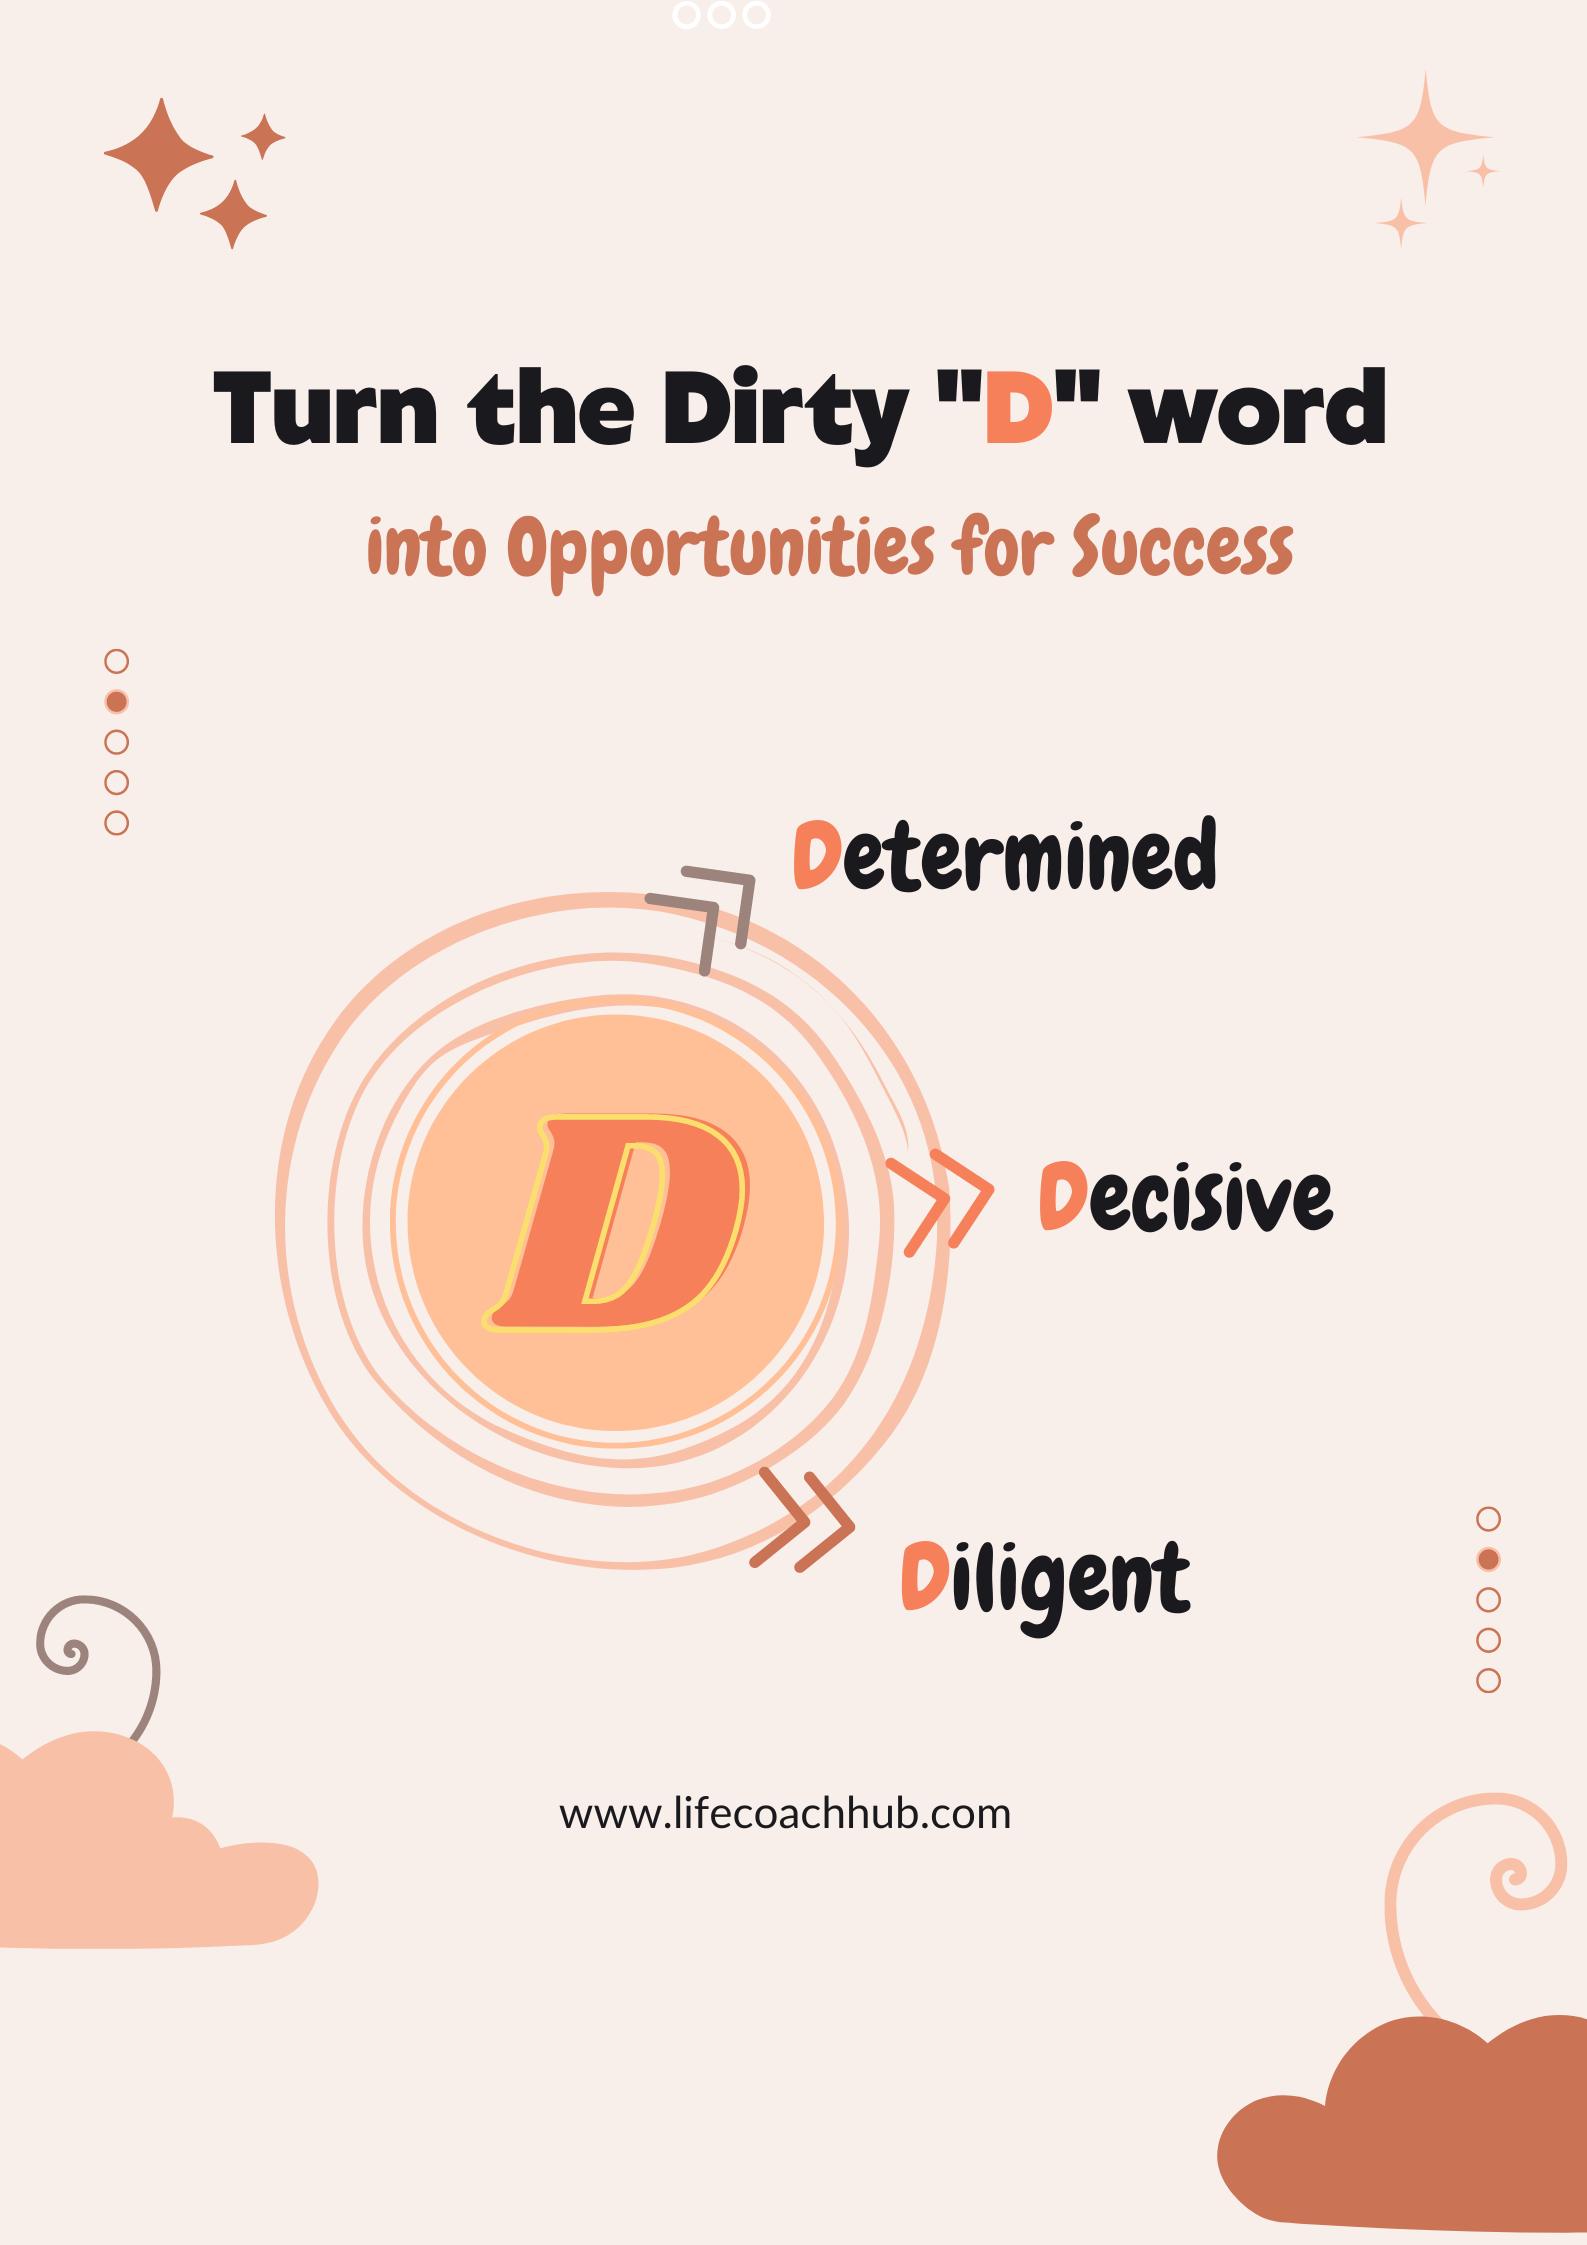 Turn the dirty d word to success